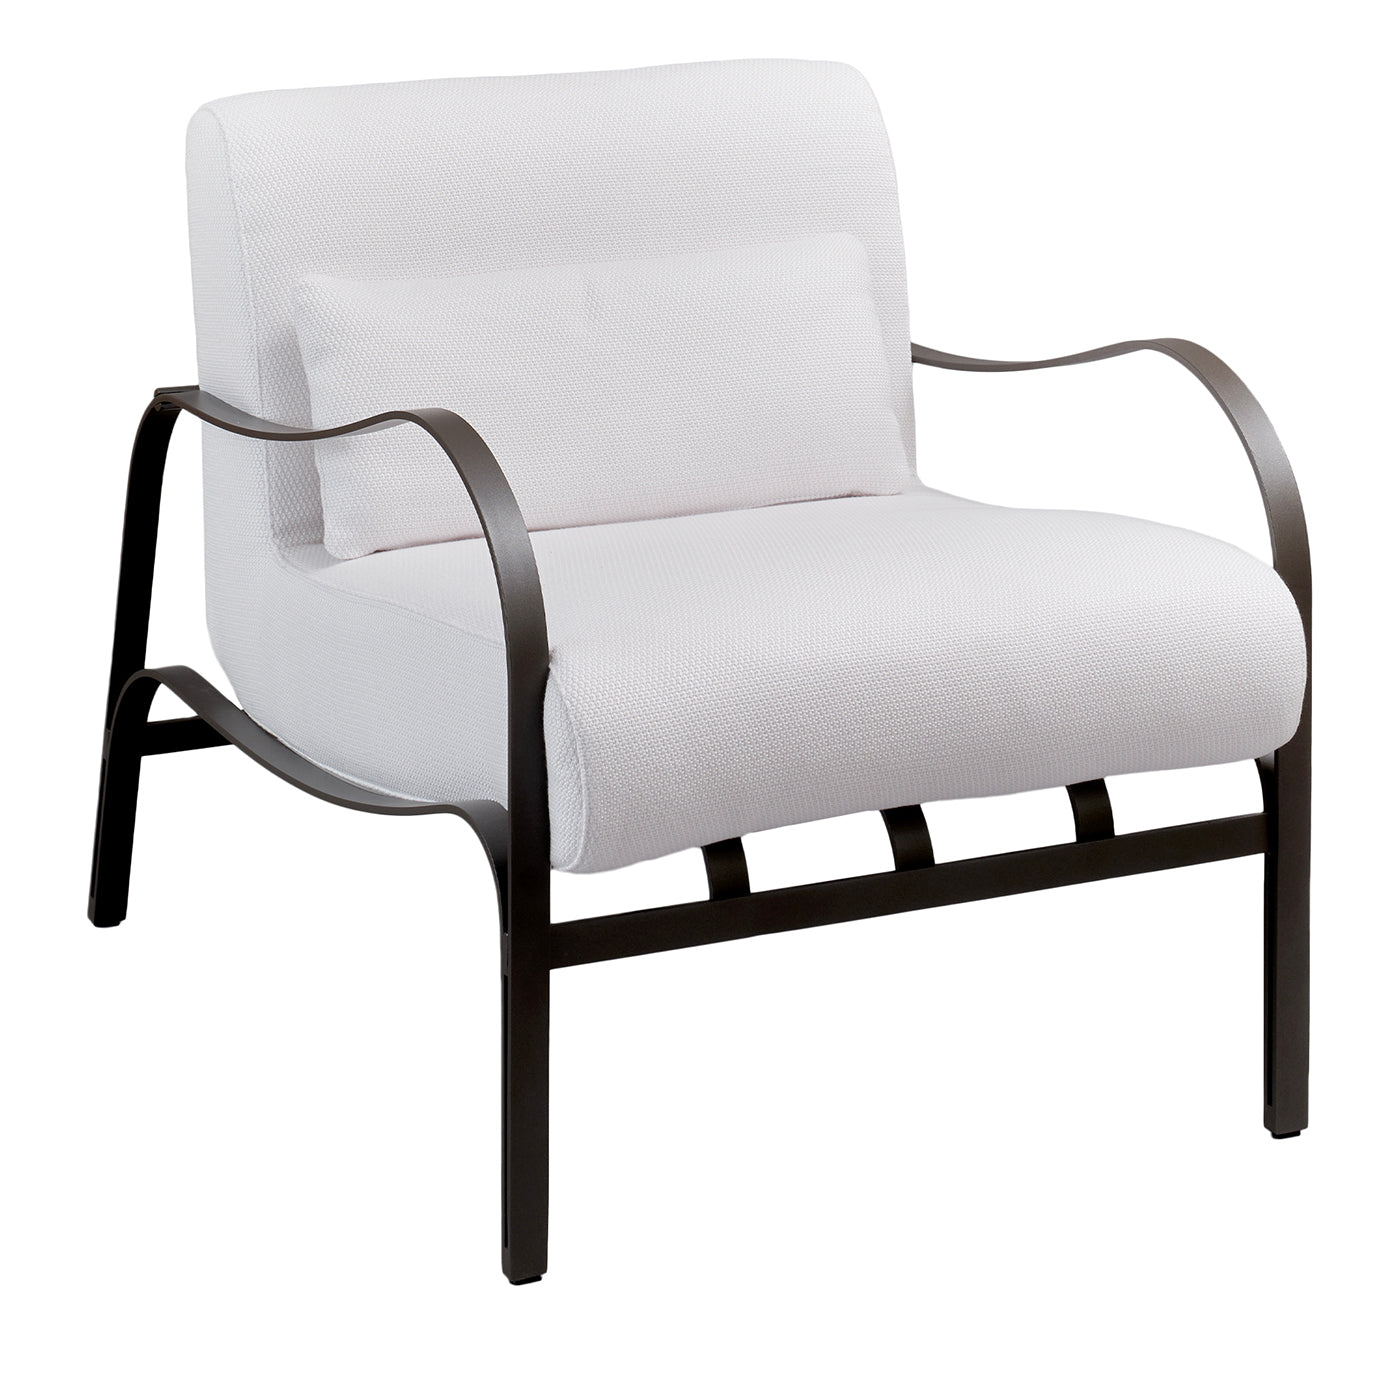 Amalfi White and Gray Armchair by Studio 63 in Stainless Steel - Main view